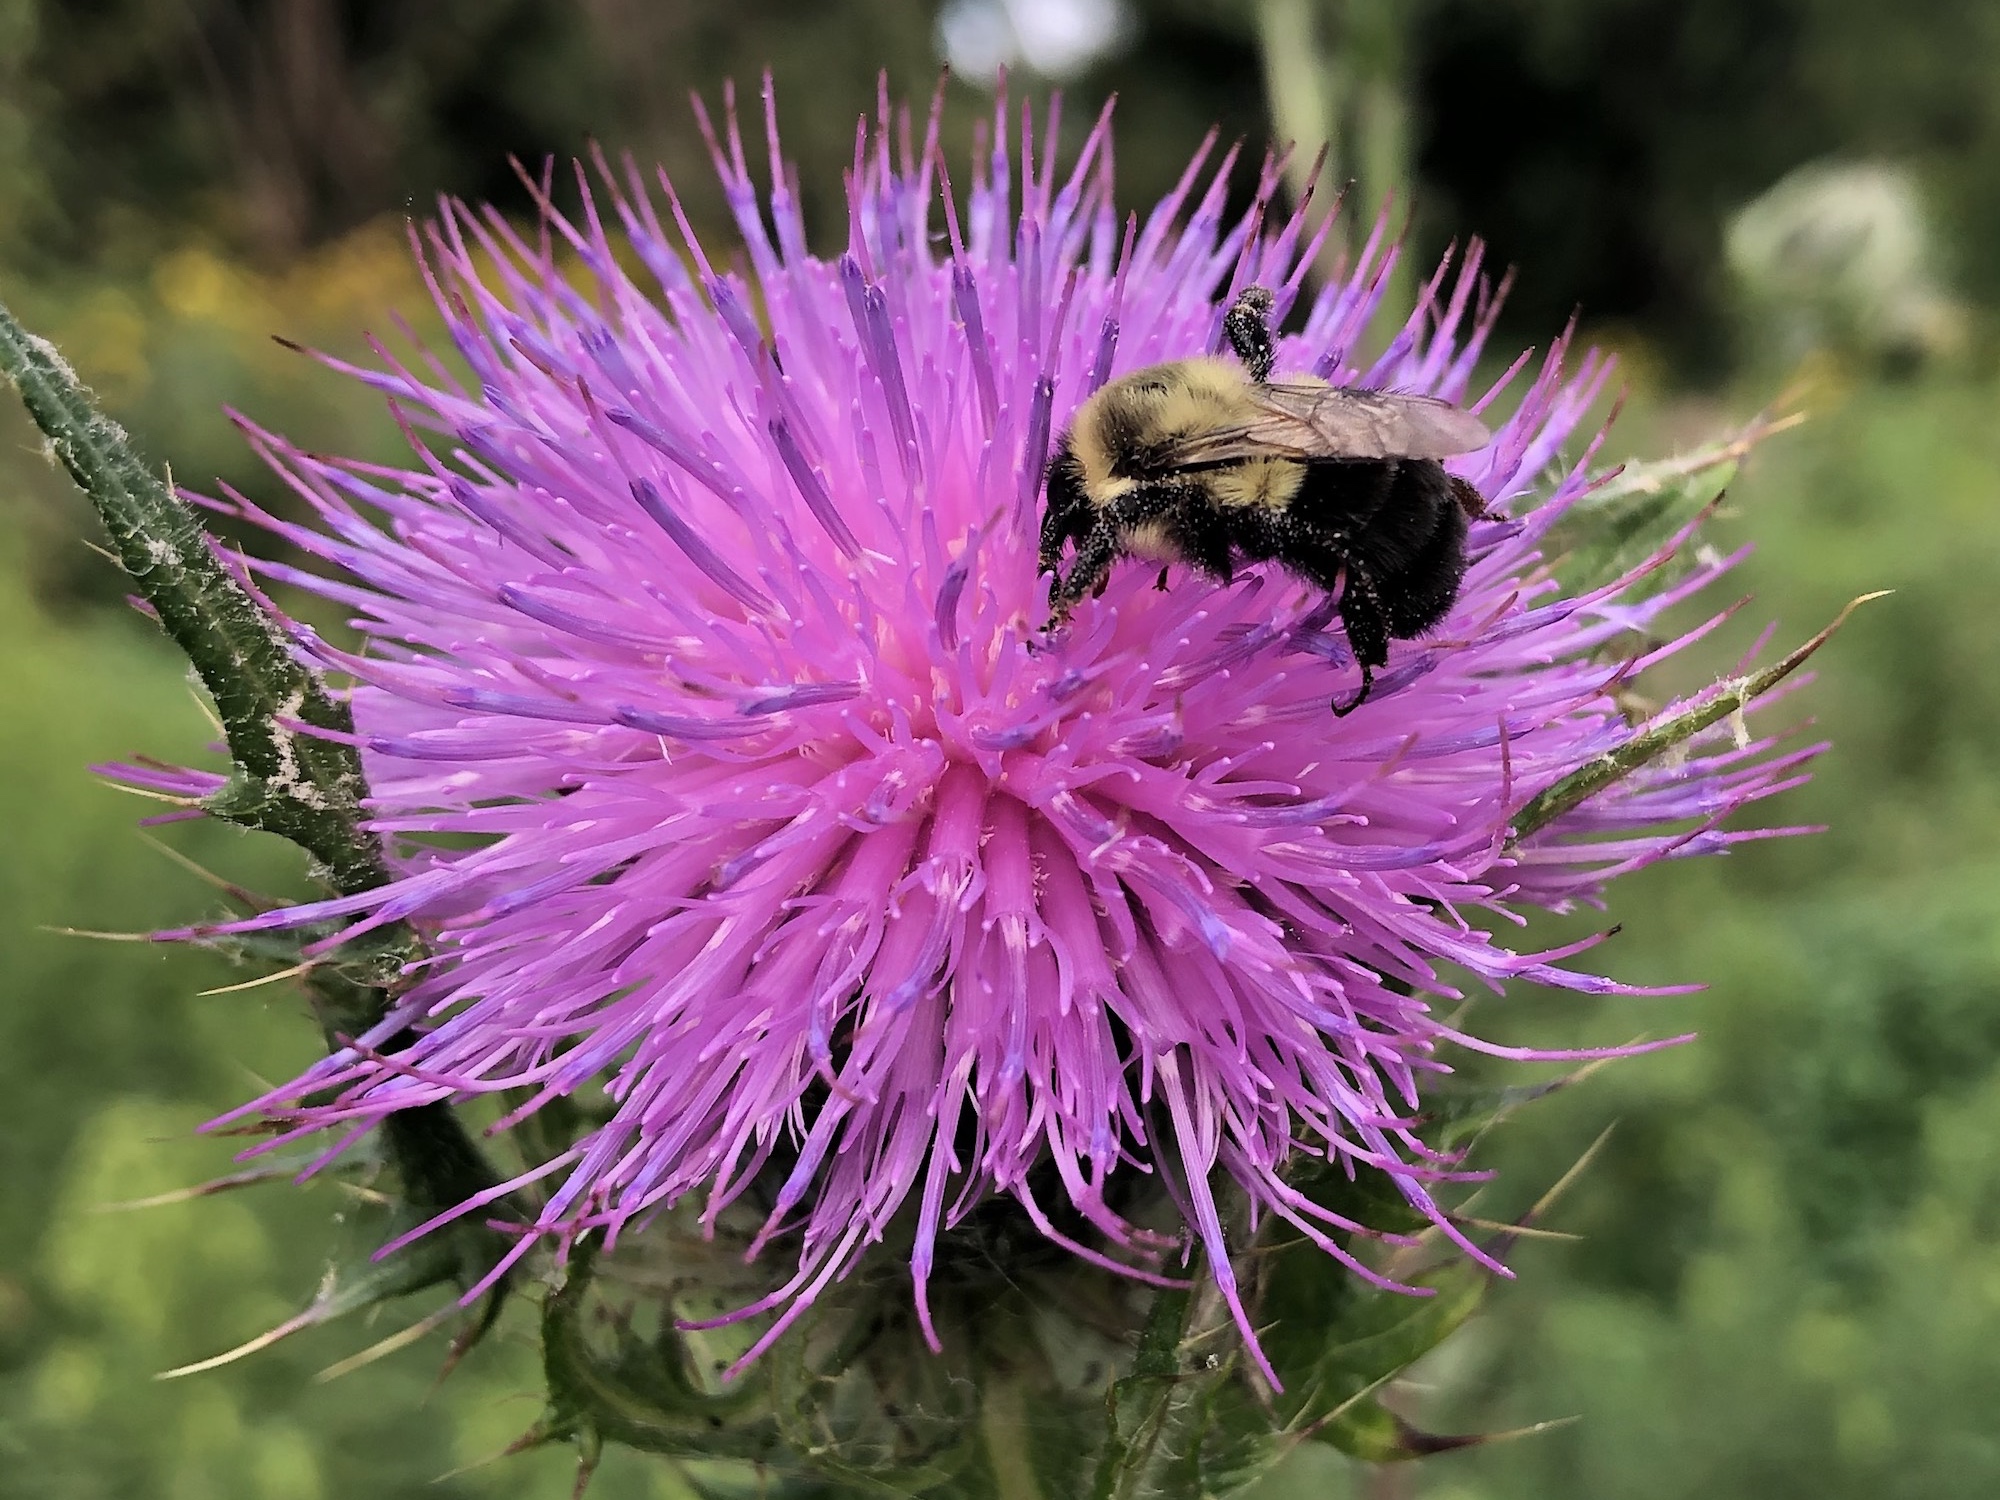 Bumblebee on Thistle on August 6, 2020.